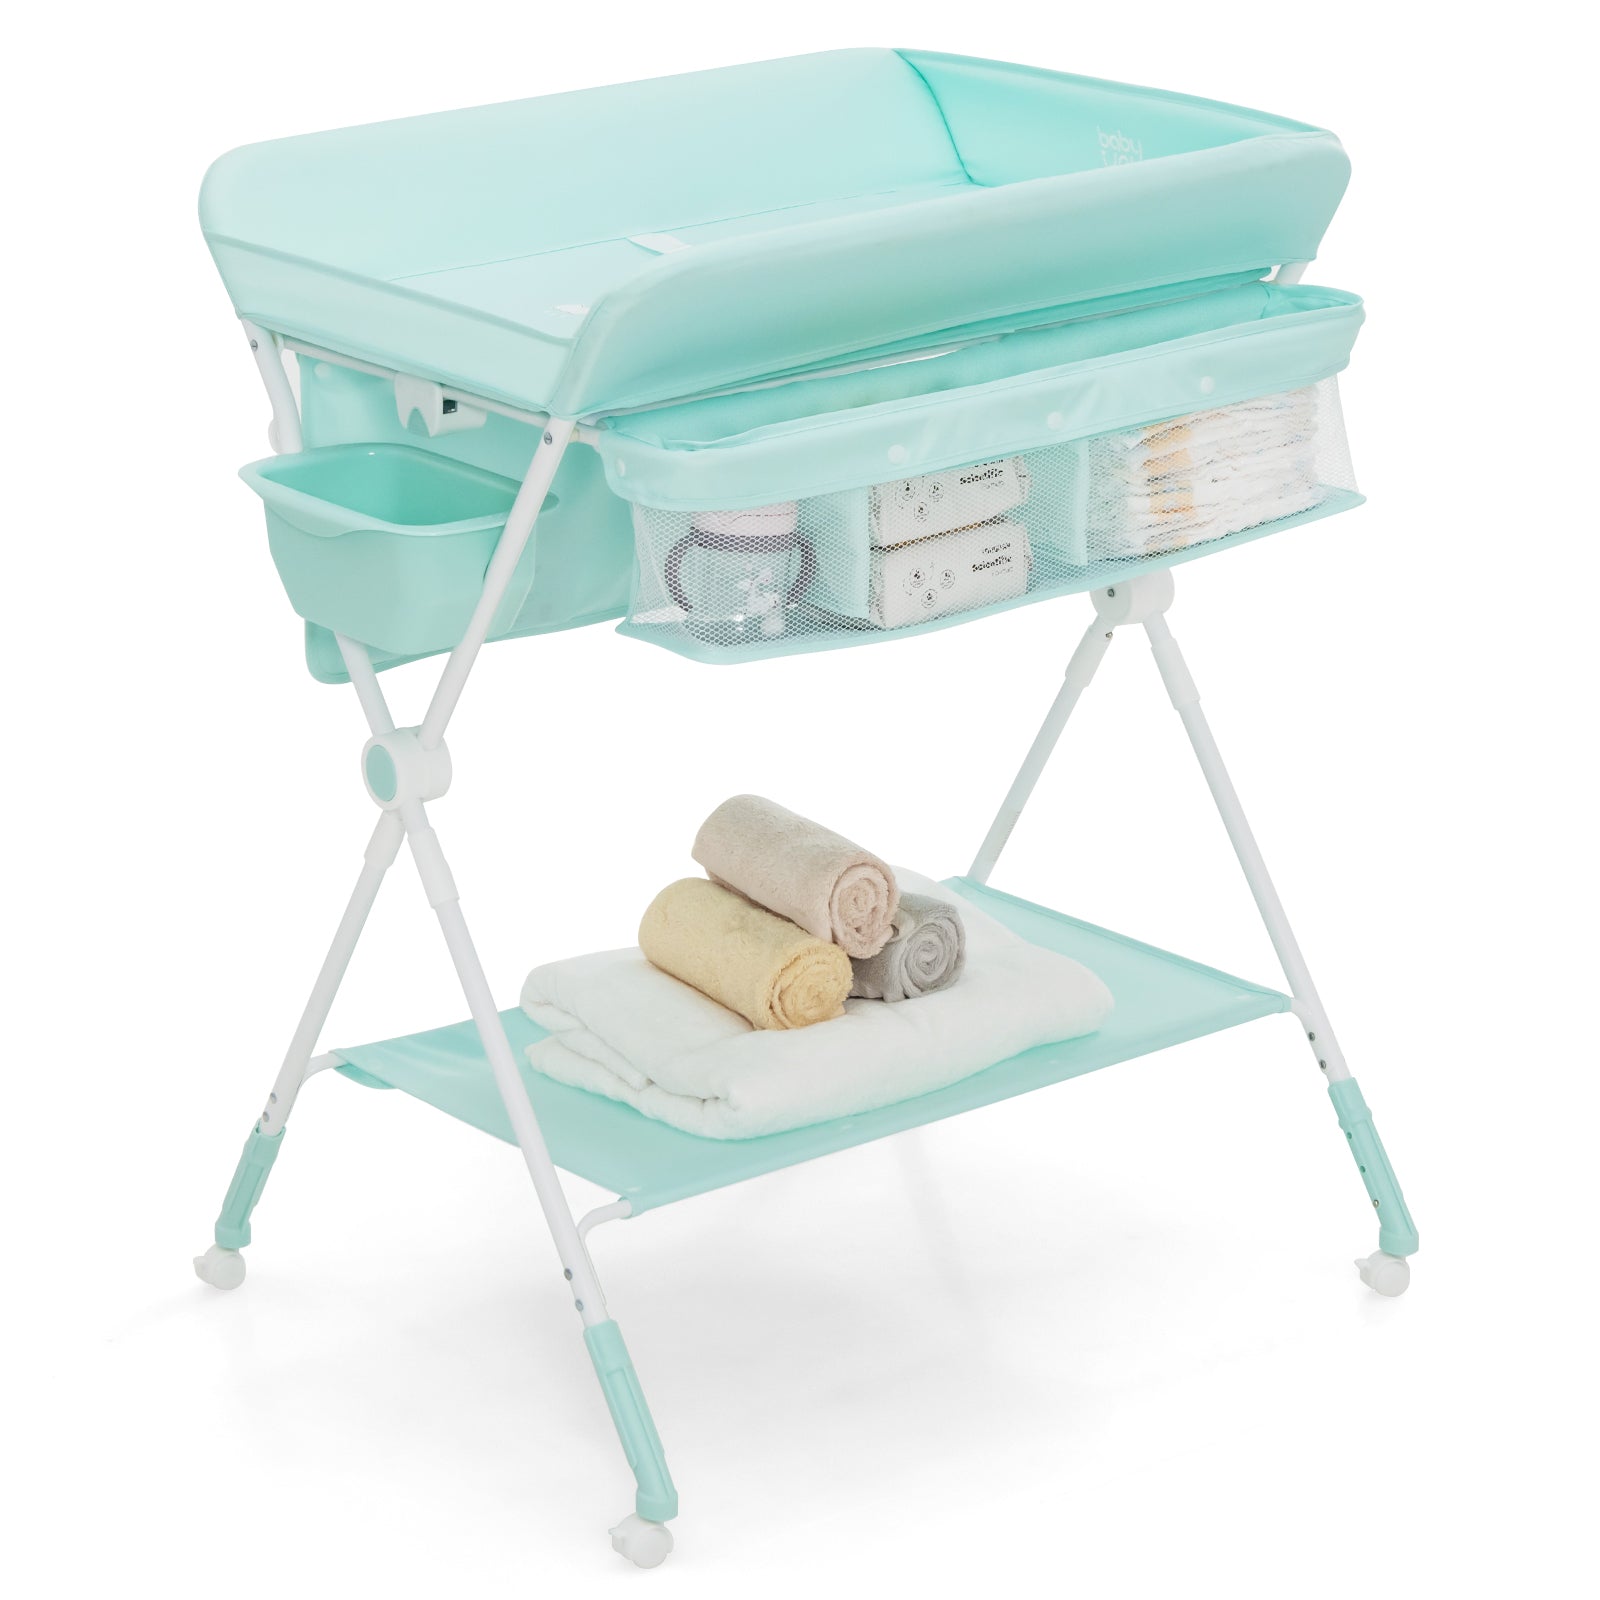 Portable Baby Changing Station - Folding Table for Newborn Nursery